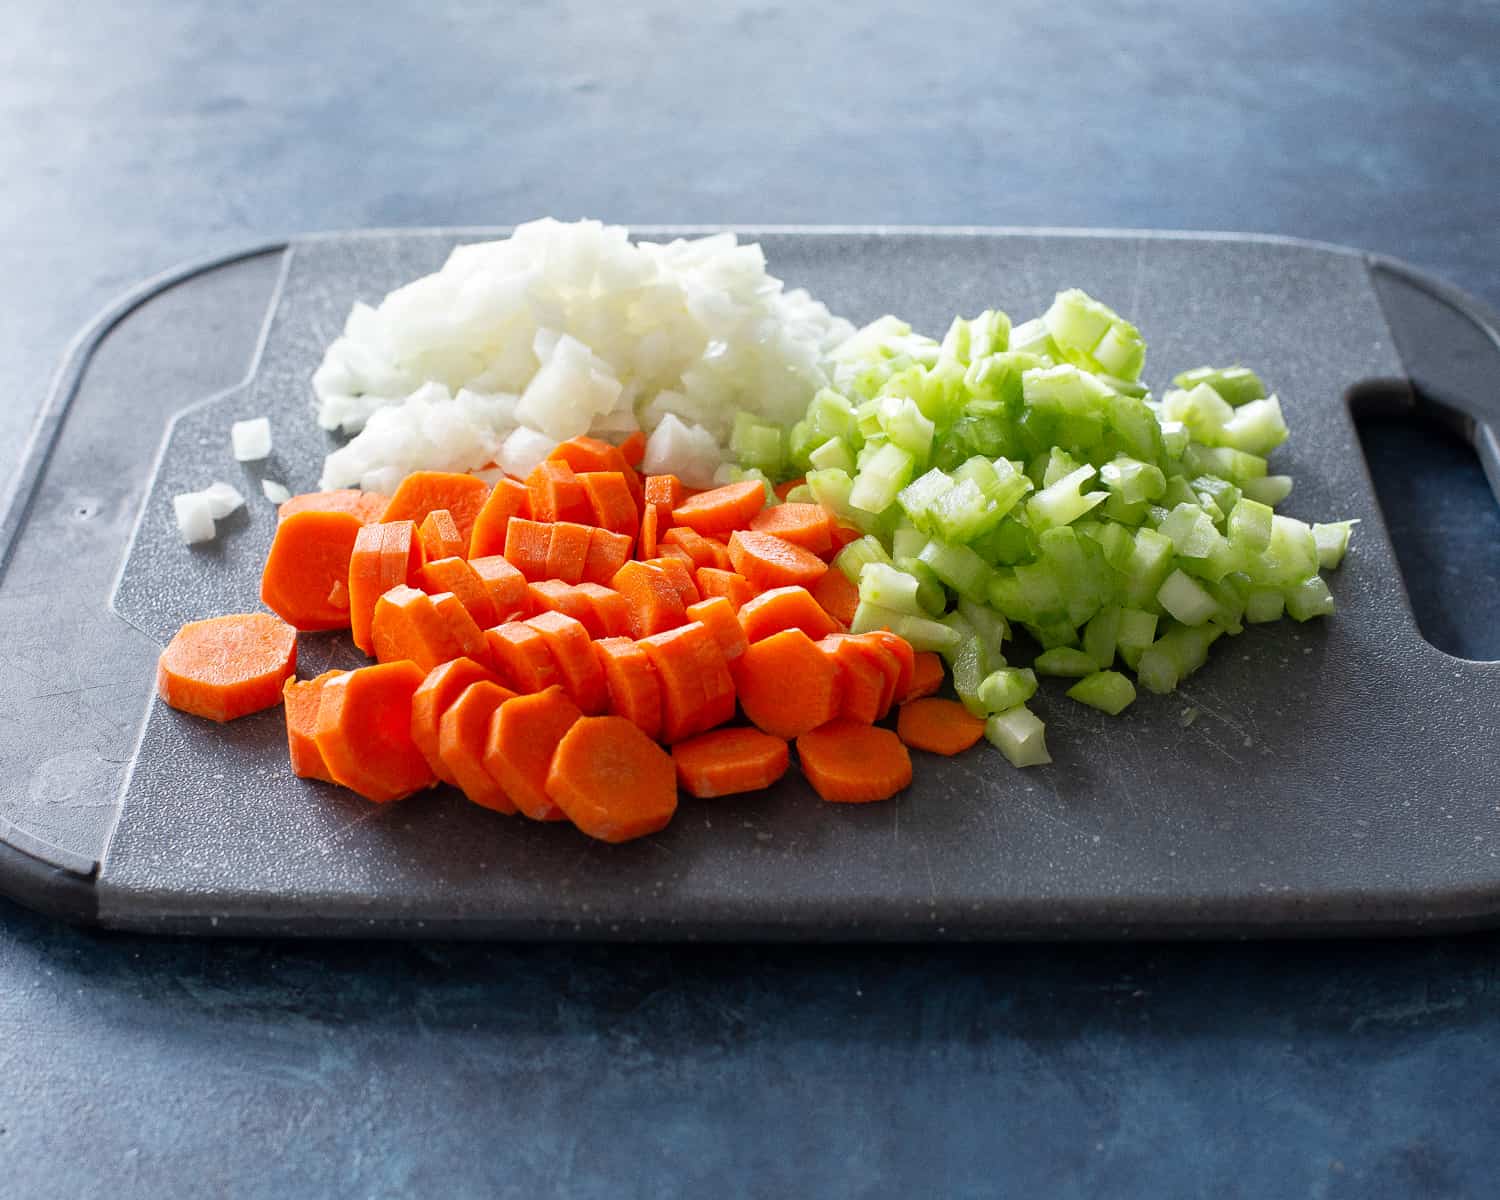 carrots, onions, and celery